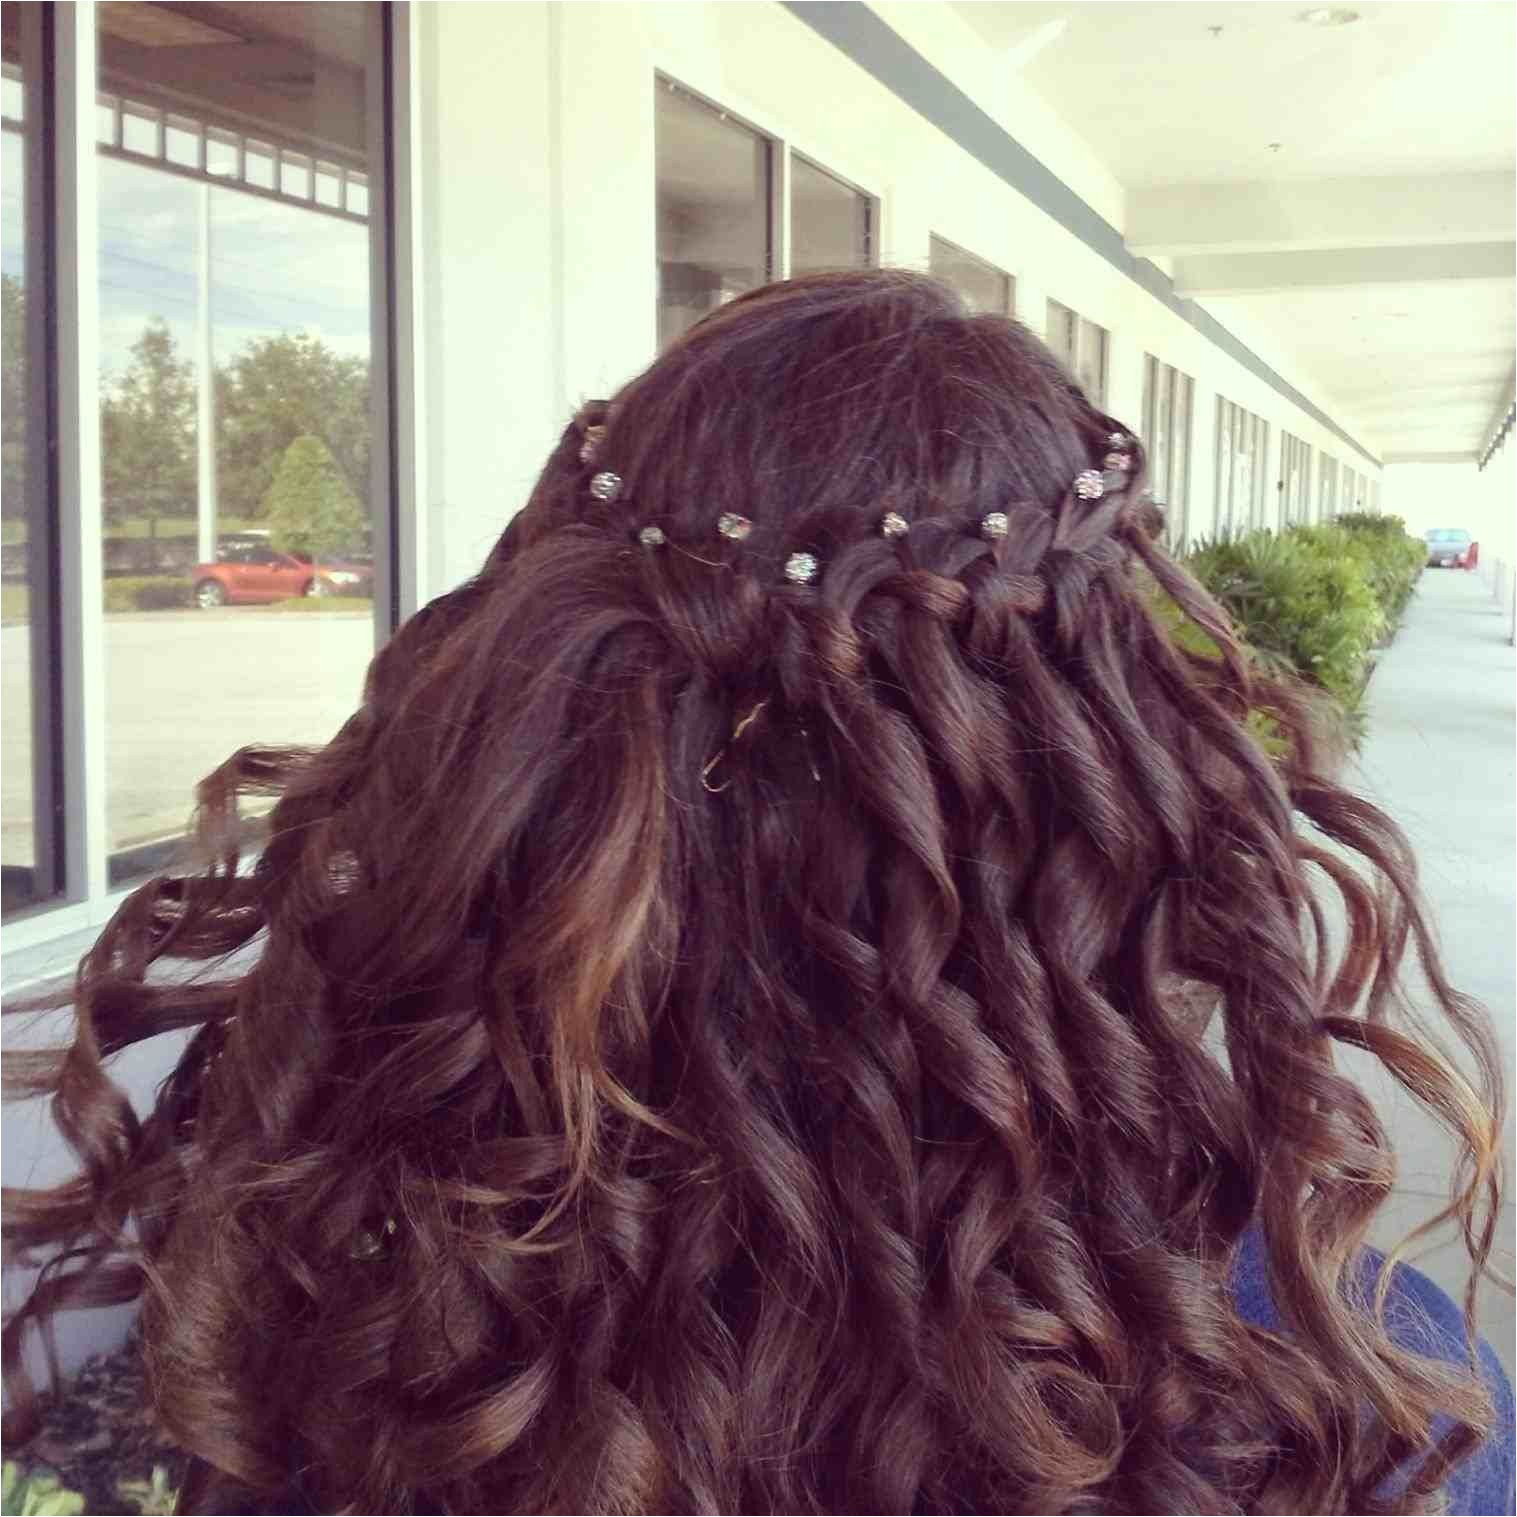 curly hair home ing ideas pinterest waterfall Long Hairstyles Braids Curls braid with curly hair home ing ideas